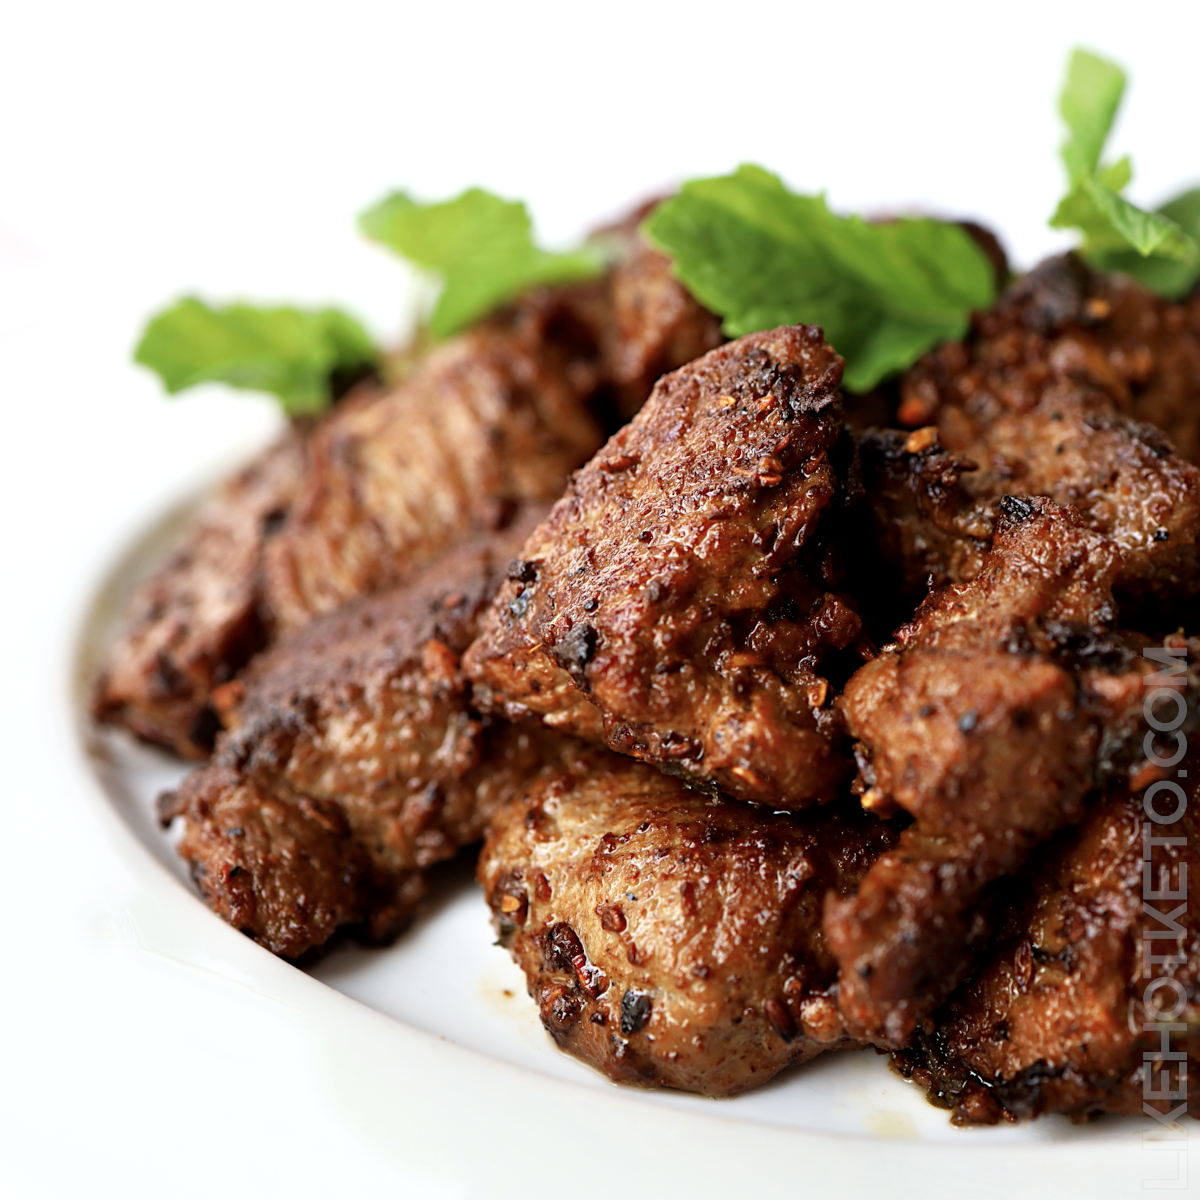 Cooked camel meat pieces in yogurt garnished with fresh mint leaves.